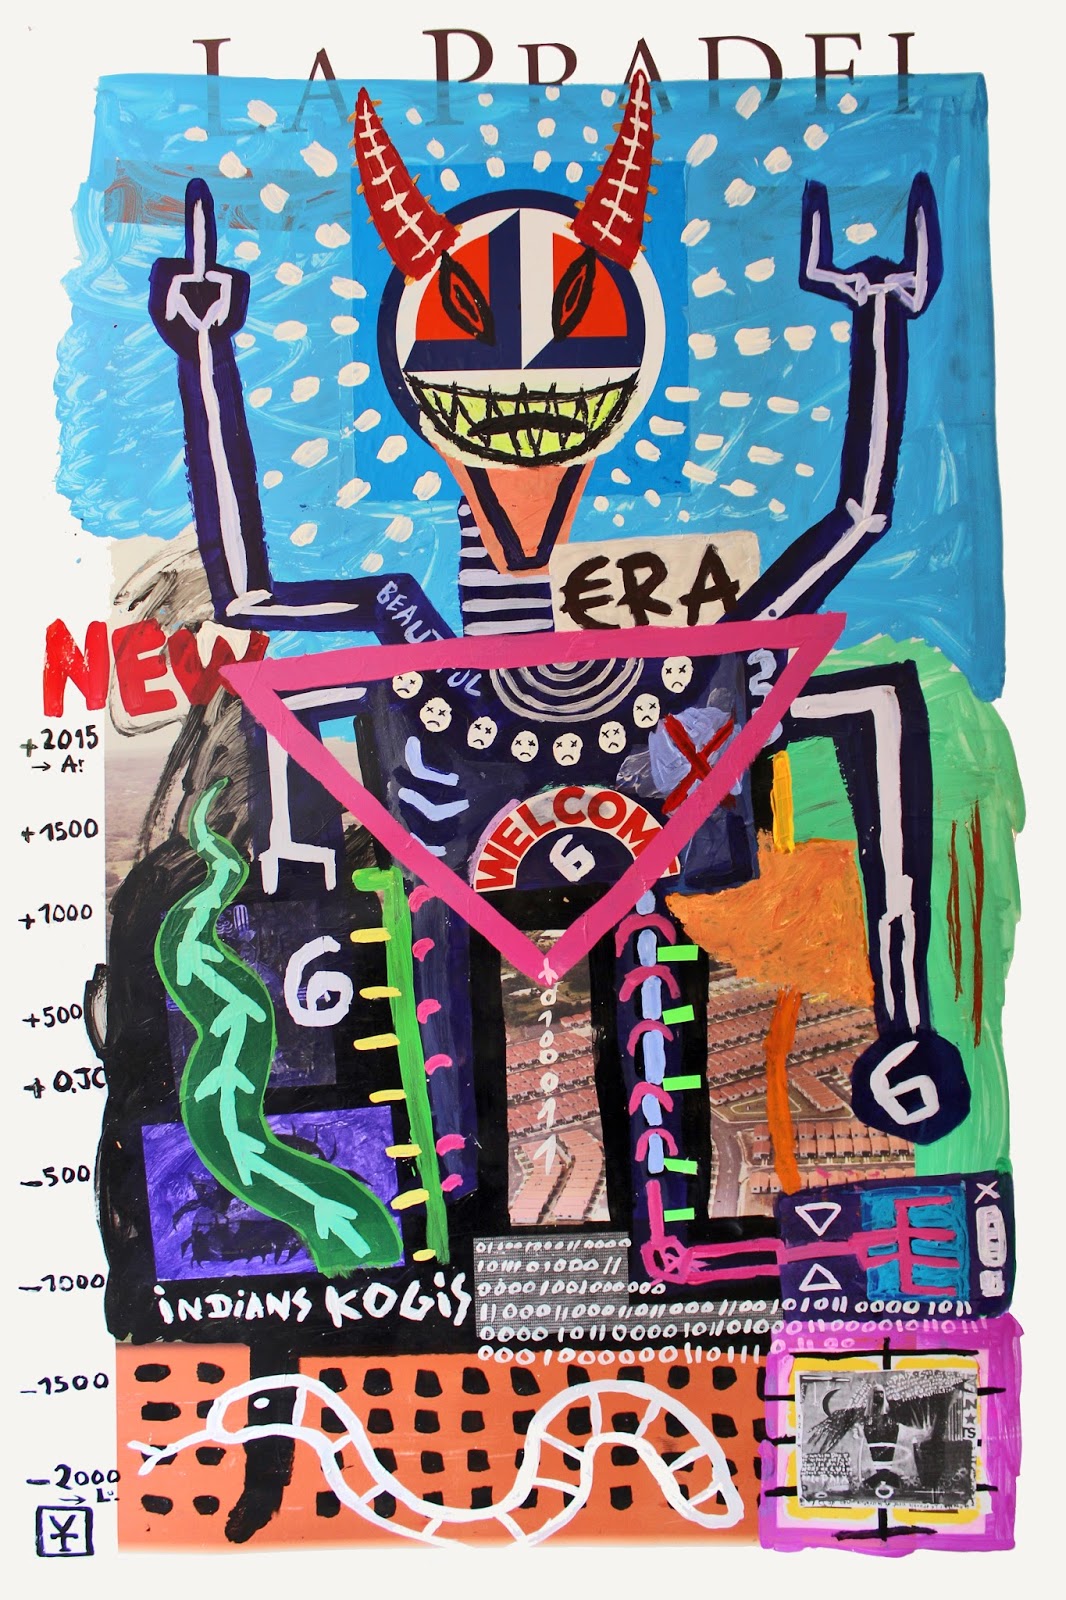 NEW BEAUTIFUL ERA - Acrylic and collage on plastic - 75x48inch- 2015